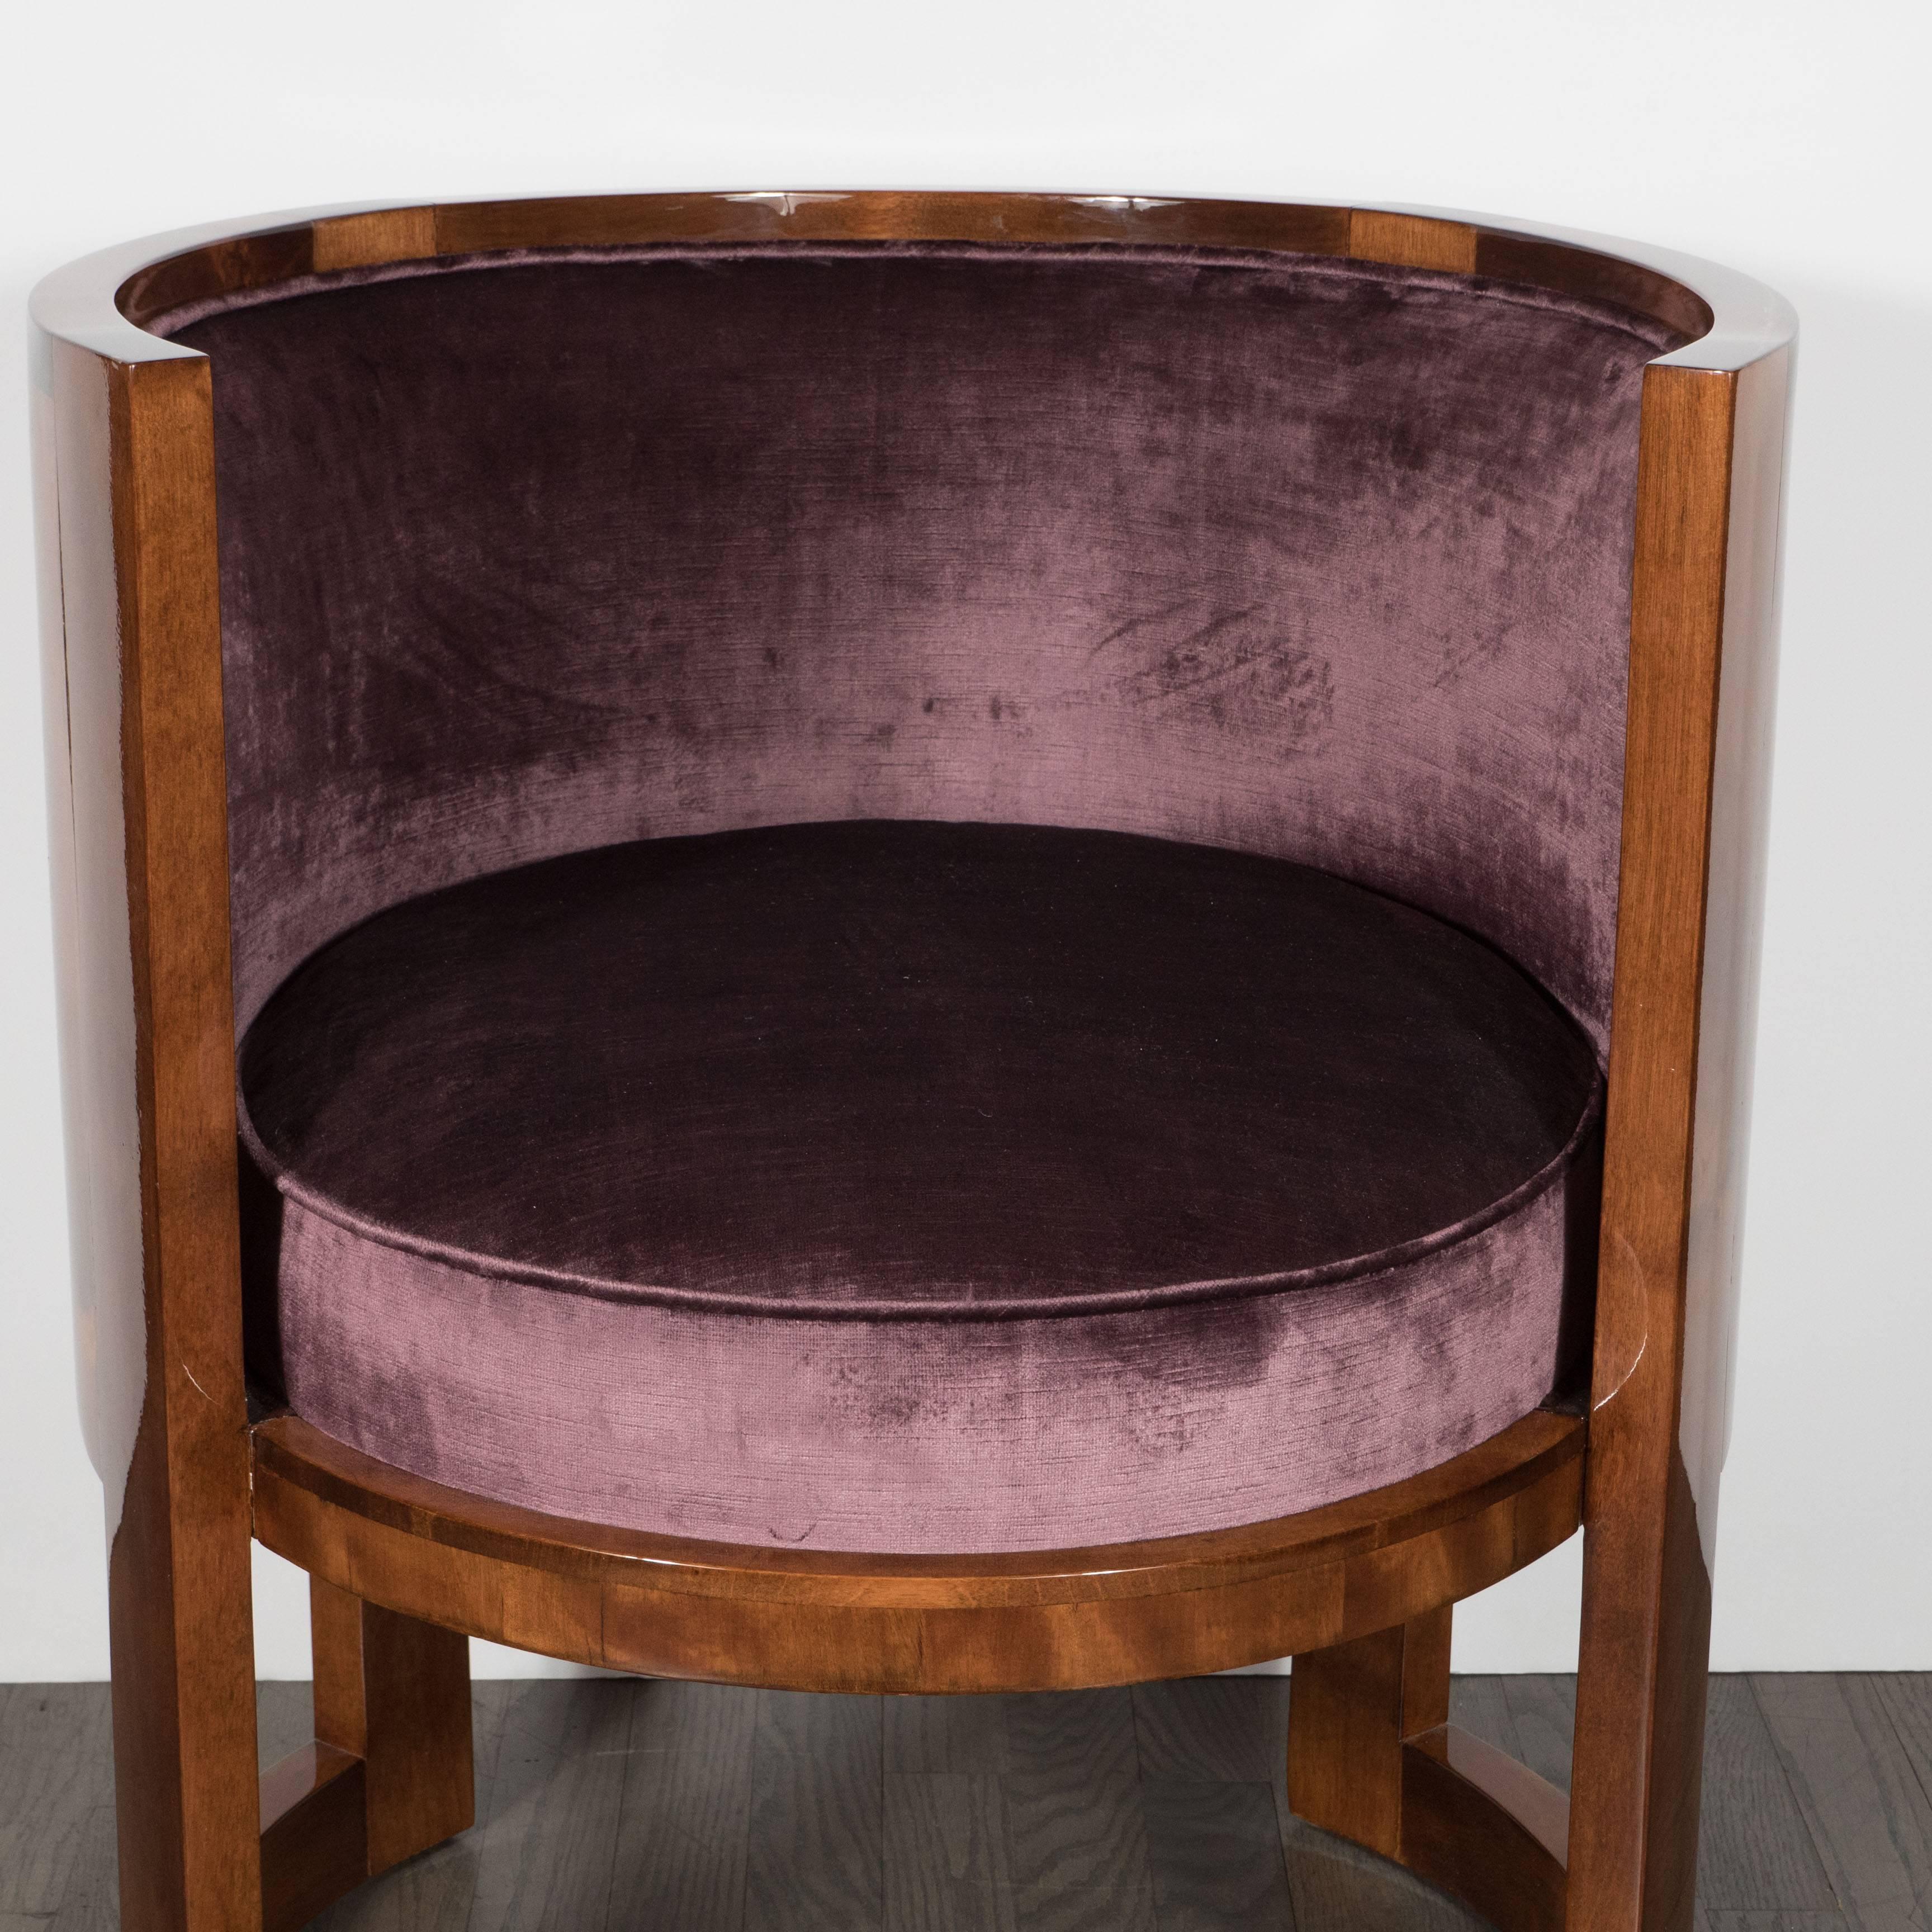 A fine pair of Art Deco curved-back salon chairs in smoked amethyst velvet and book-matched walnut. The elegant wraparound back is partially covered on the back with the dark purple upholstery. All upholstery on seat cushion, back inside and out